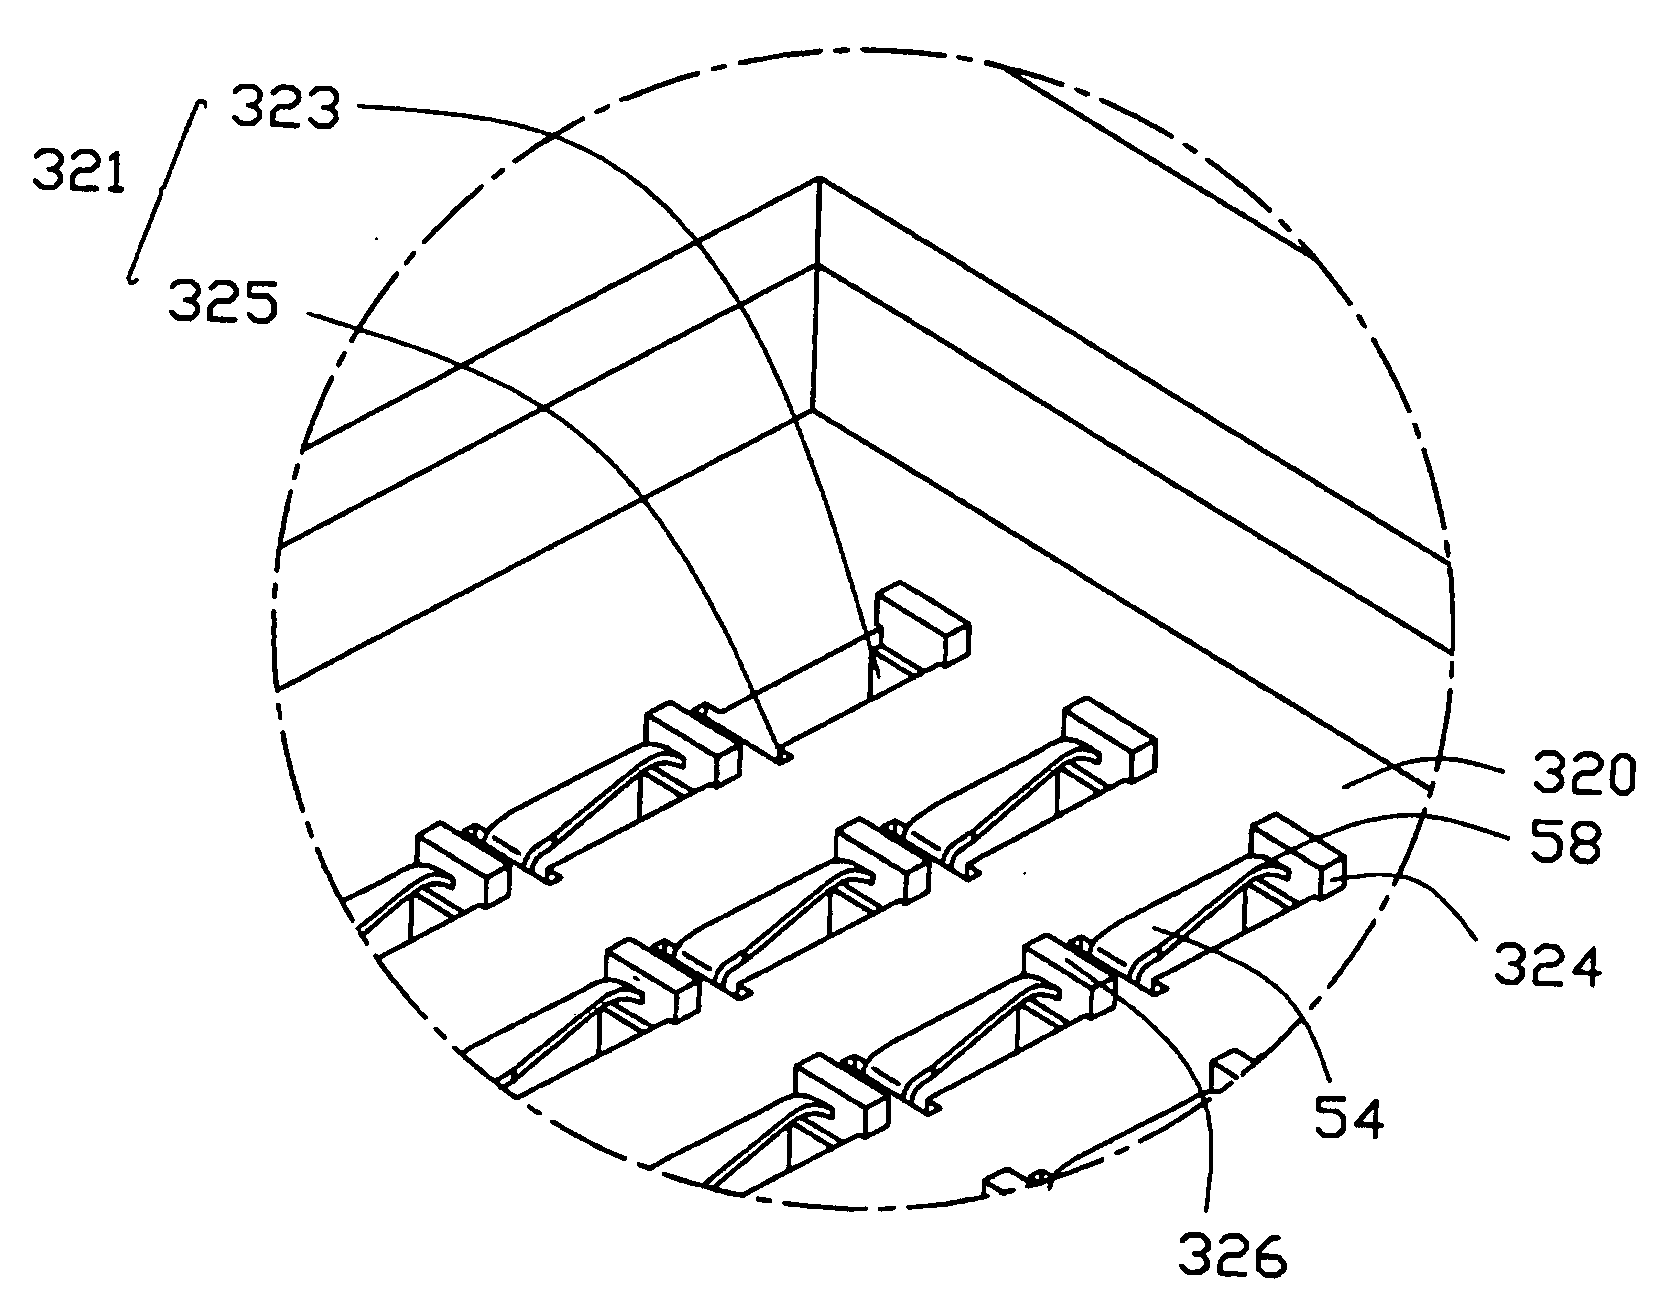 Electrical connector having protecting protrusions